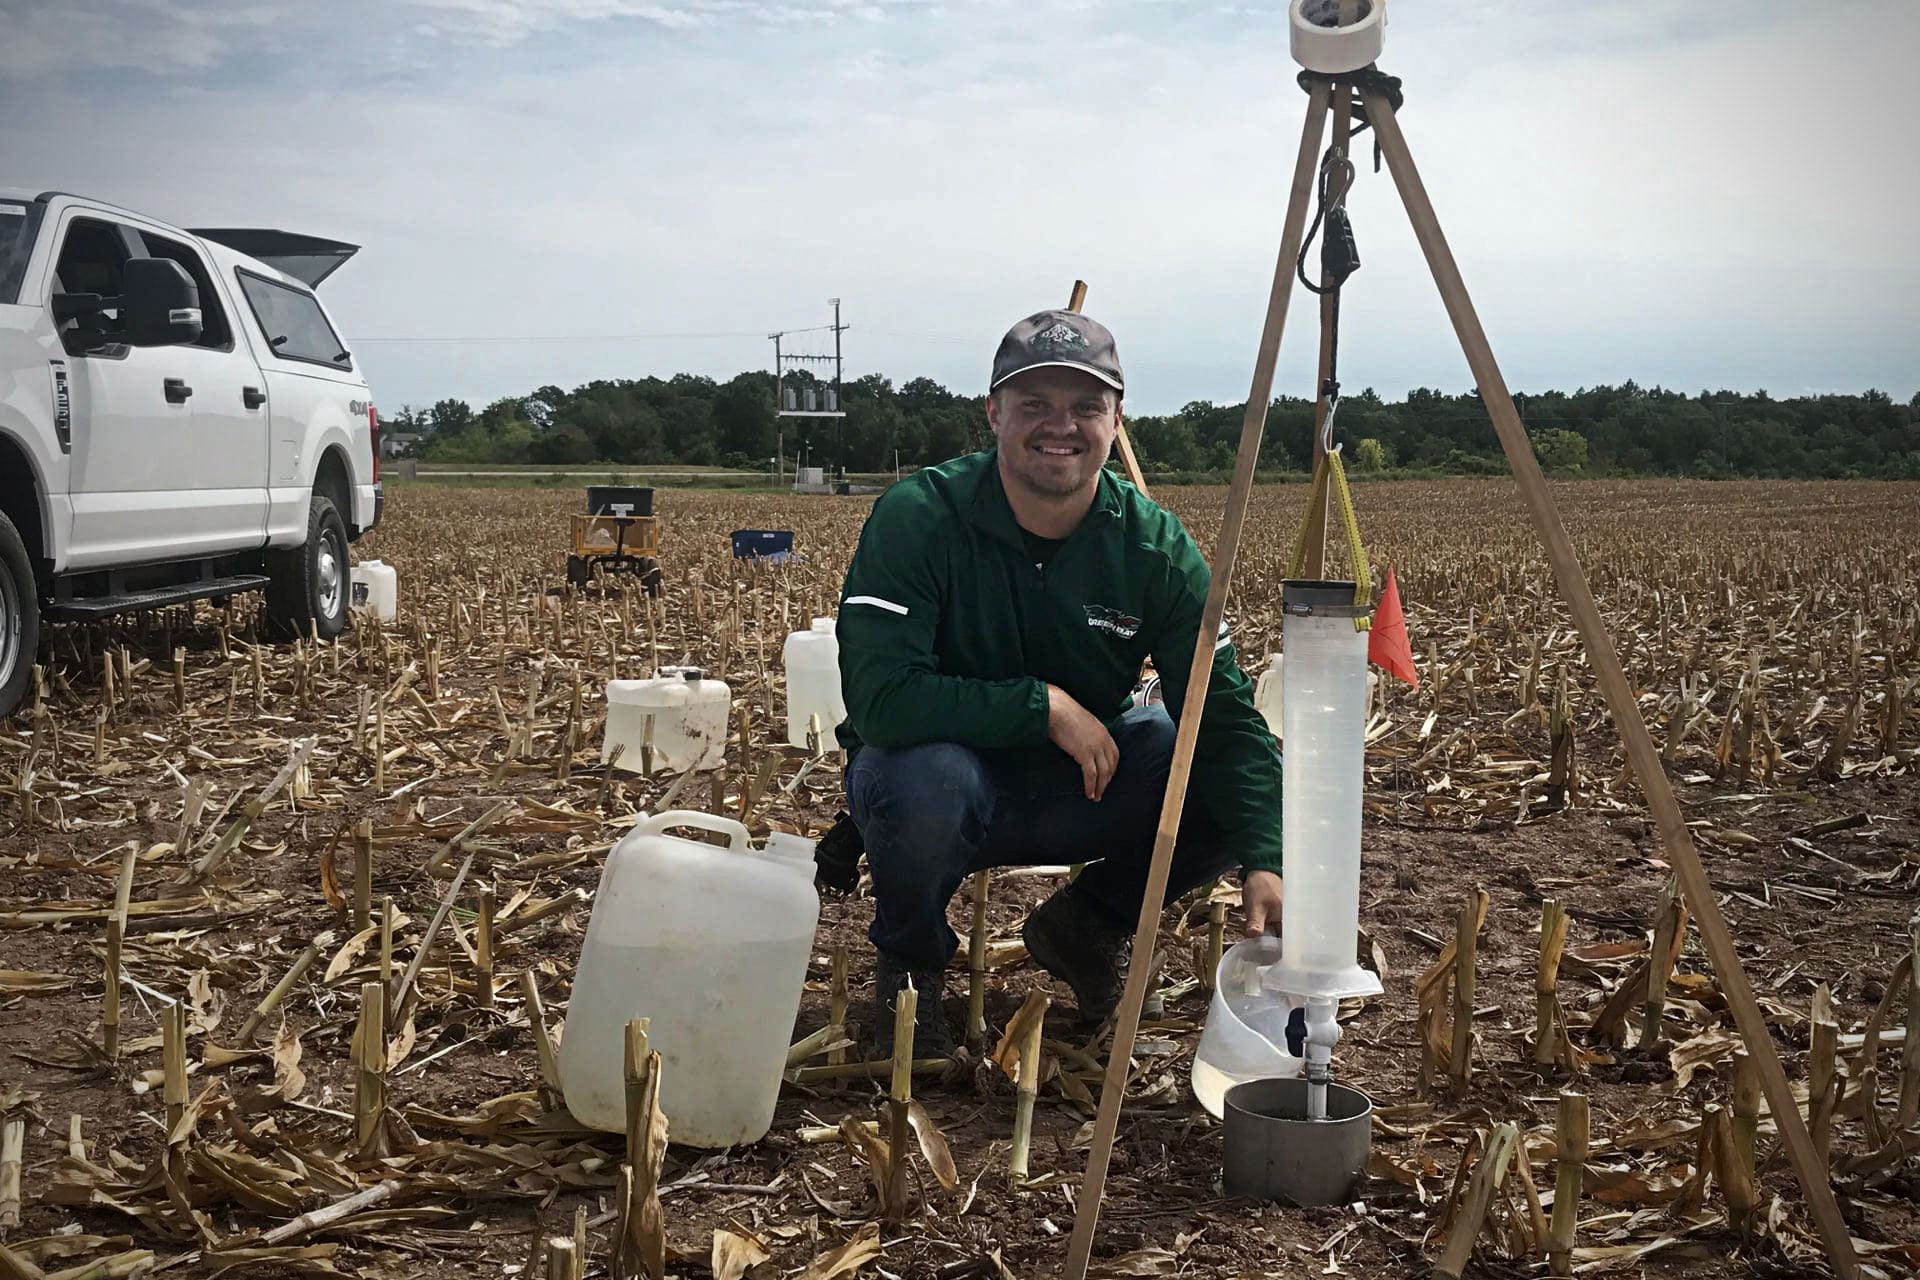 UW-Green Bay Environmental Science student Jacob Derenne studying soil health and water quality.